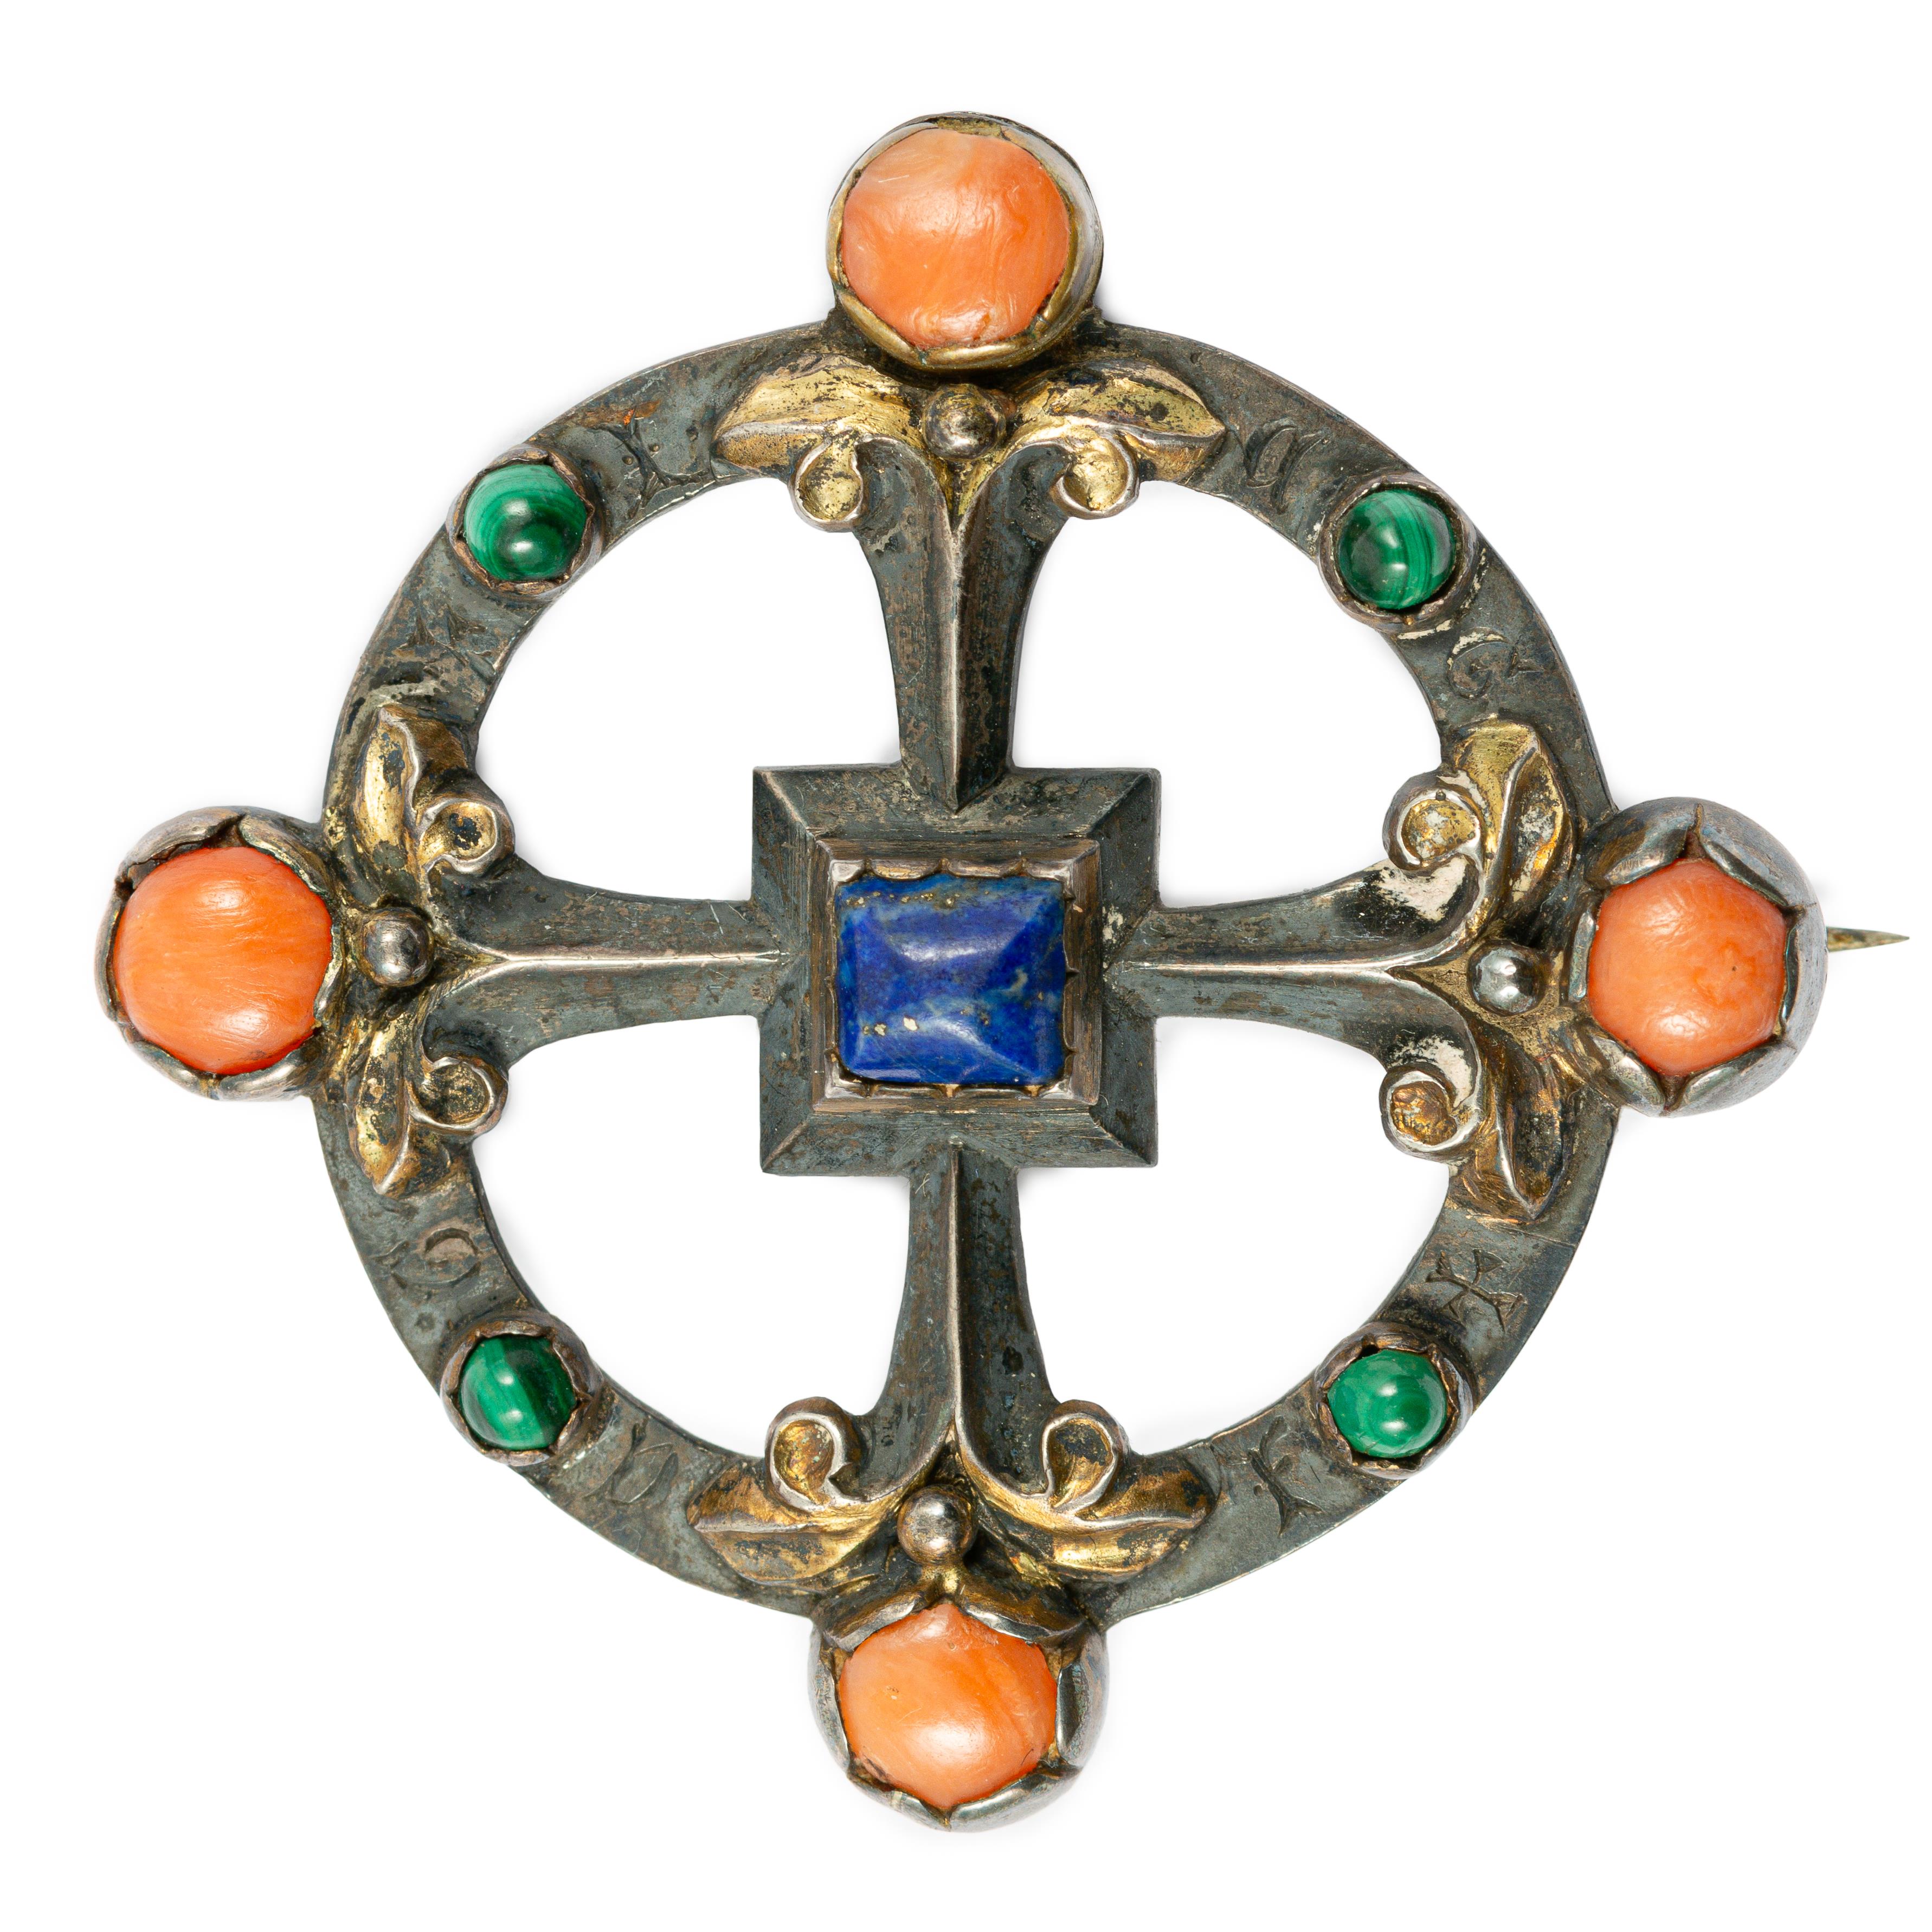 The 'Gibson' bridesmaid brooch, designed by William Burges, 1853